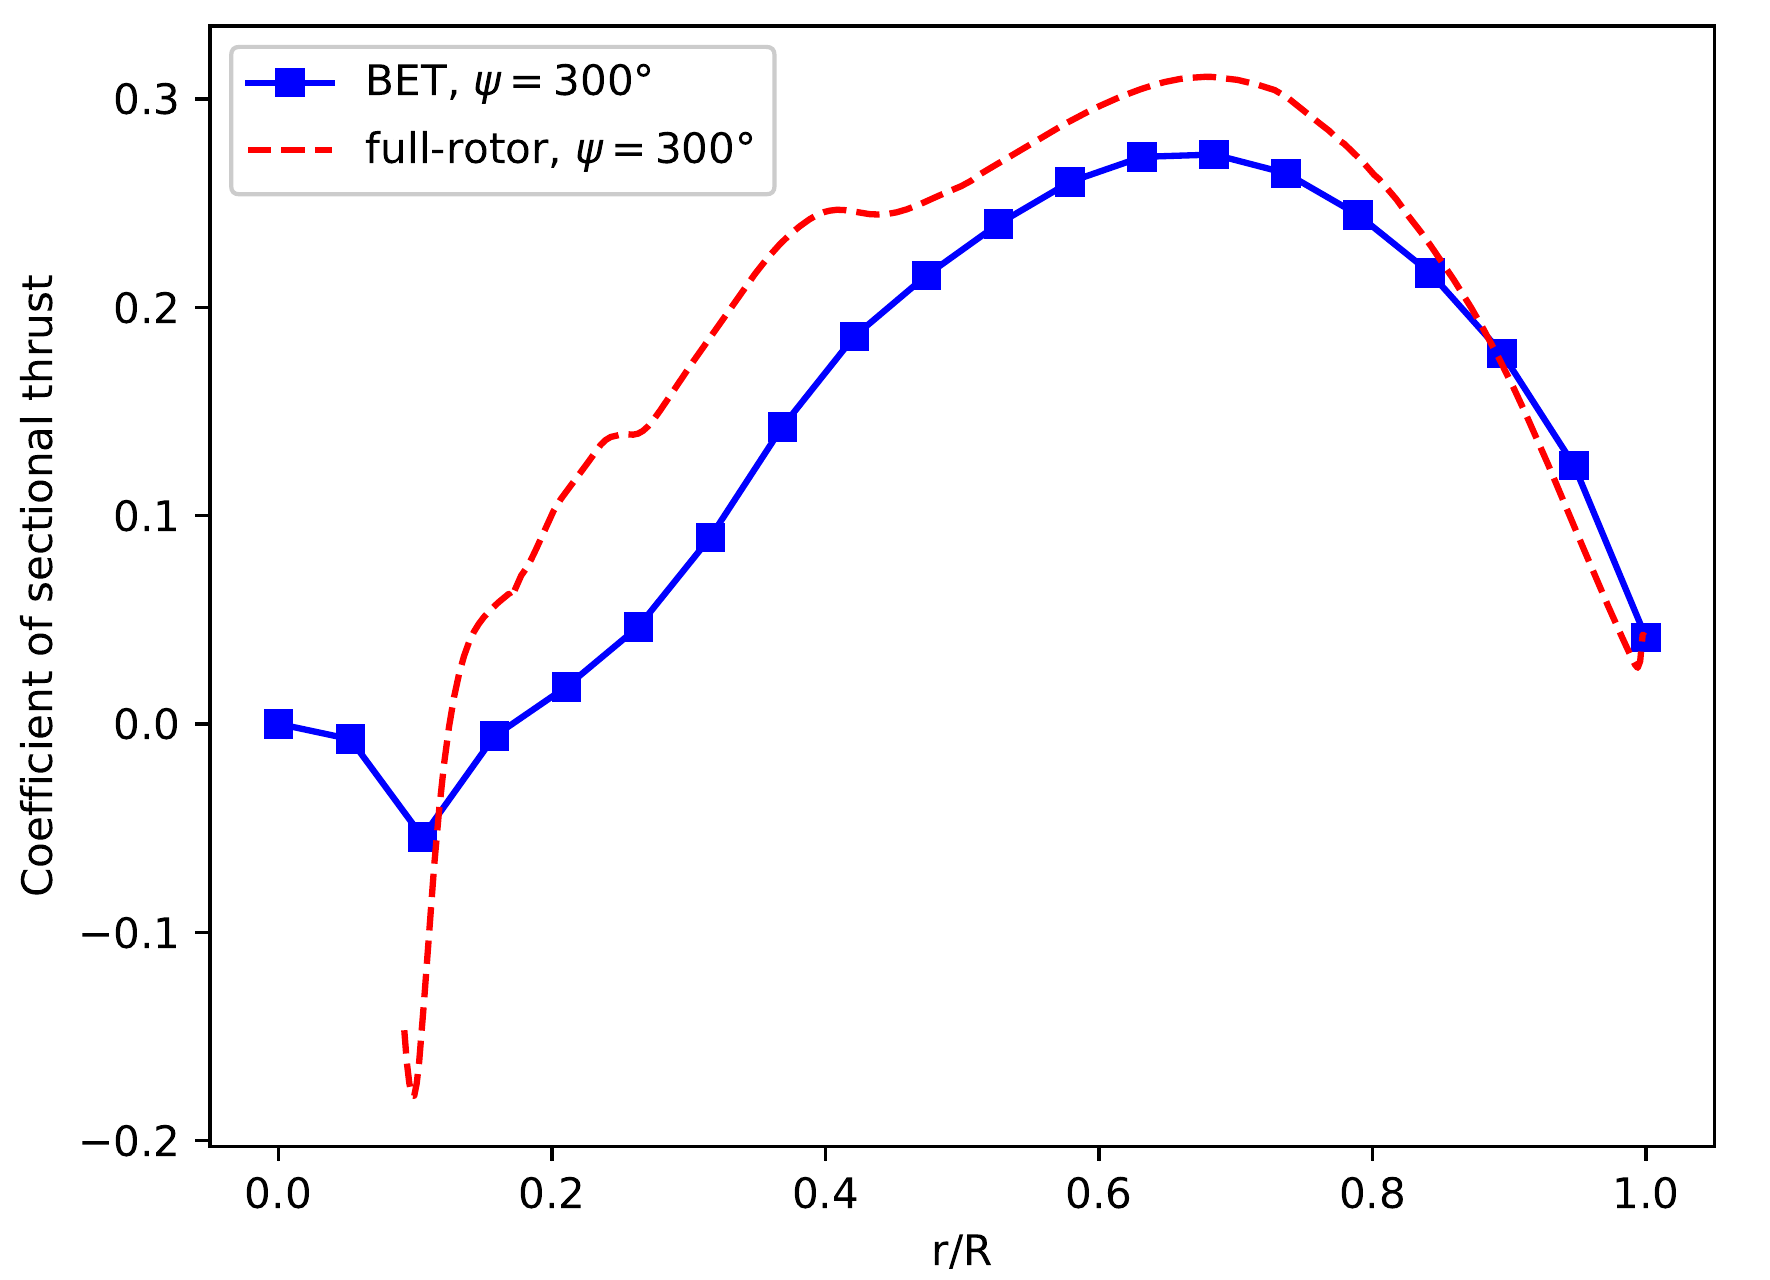 blade thrust and torque loading distributions compared between the BET Line model and the high-fidelity DES results